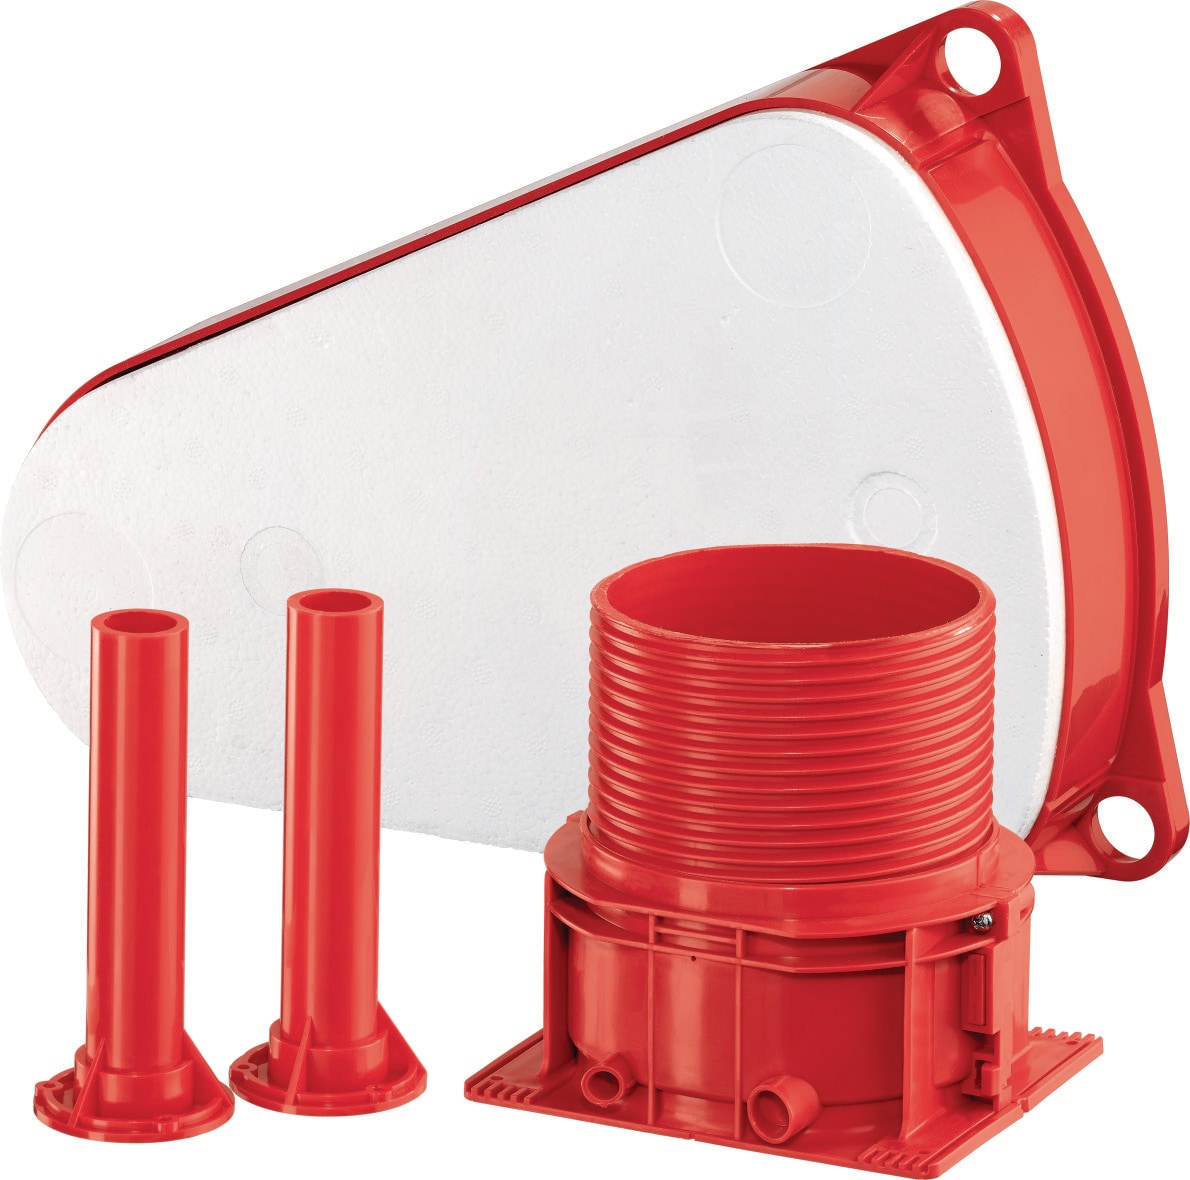 CP 681 Tub box kit - Accessories for Firestop & Fire Protection